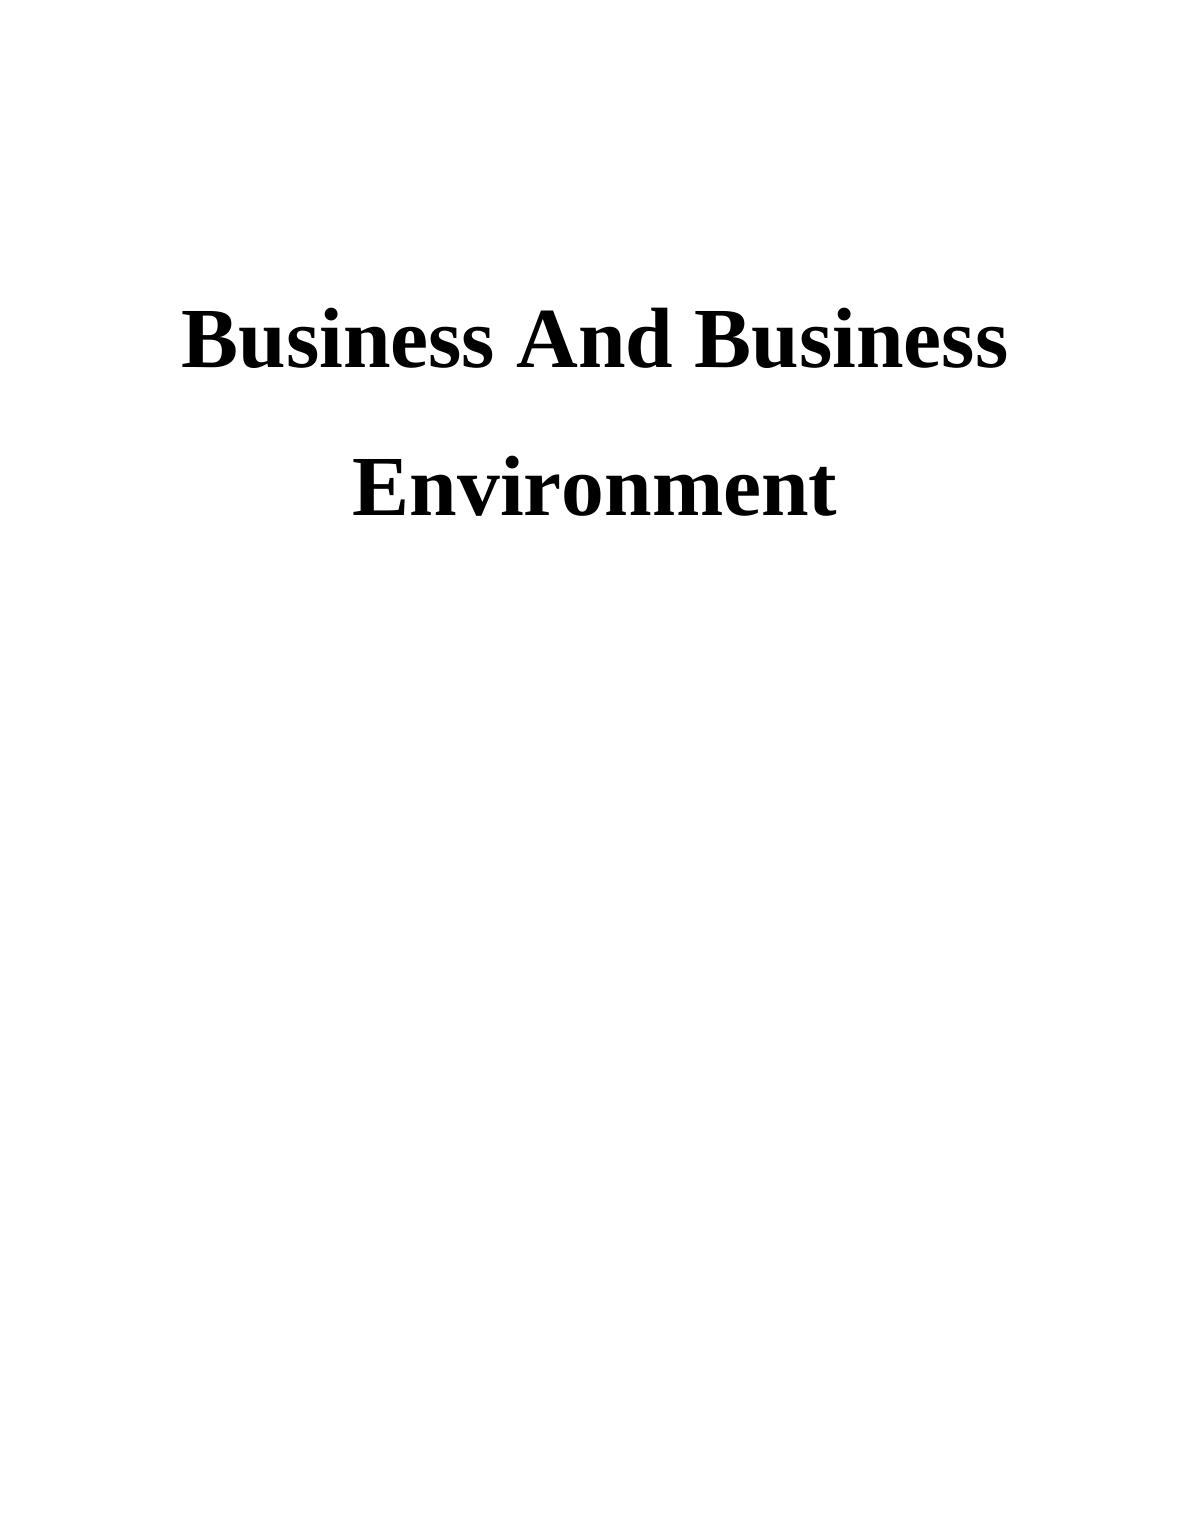 Business And Business Environment Nestle_1